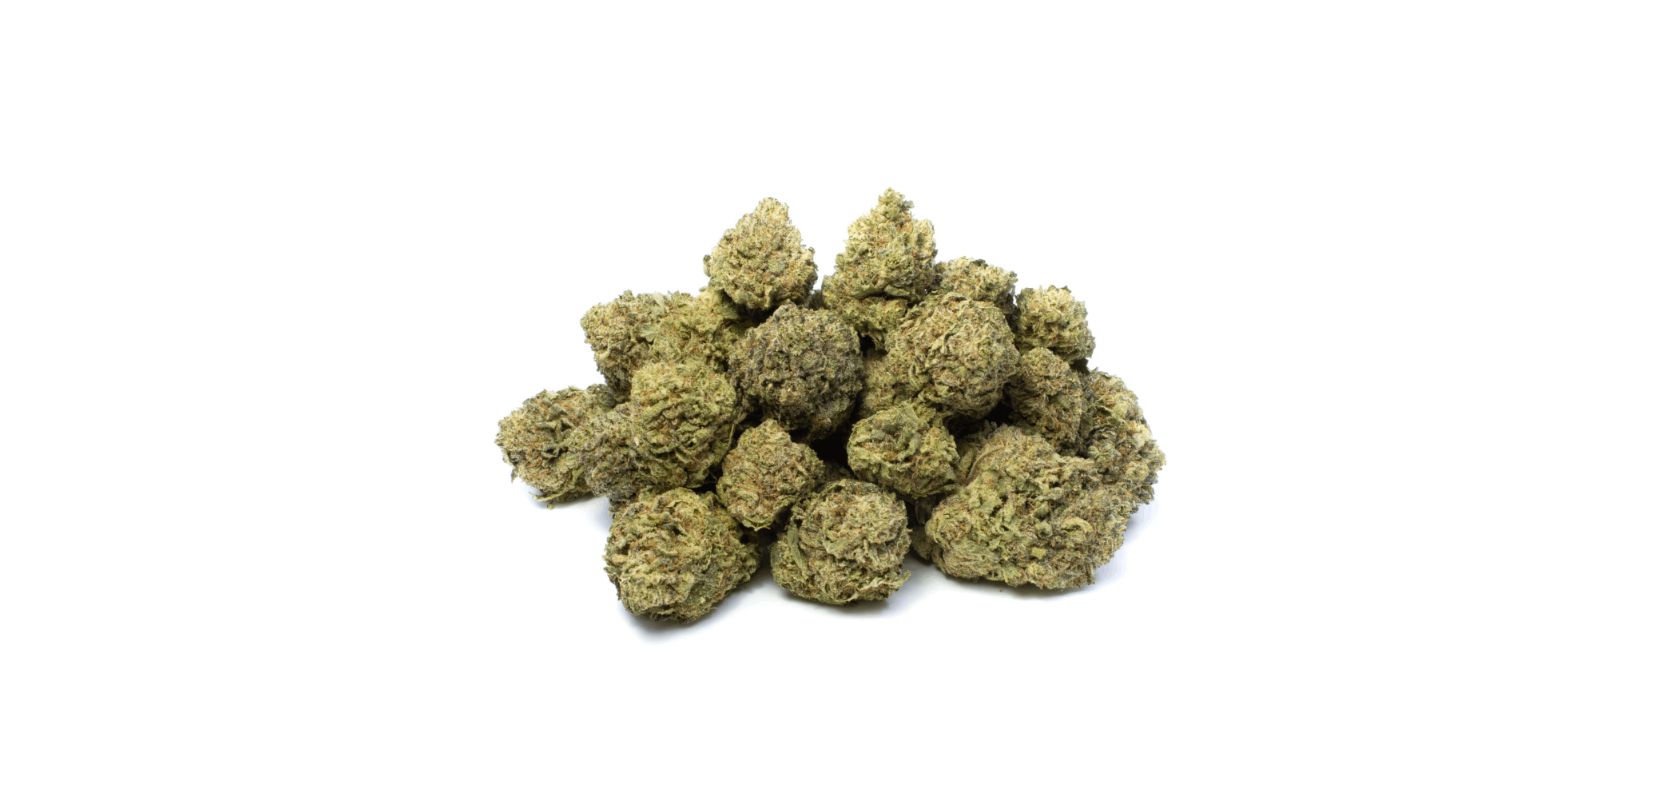 Duke Nukem weed is a hybrid strain believed to be a cross between Chemmando and Chernobyl.